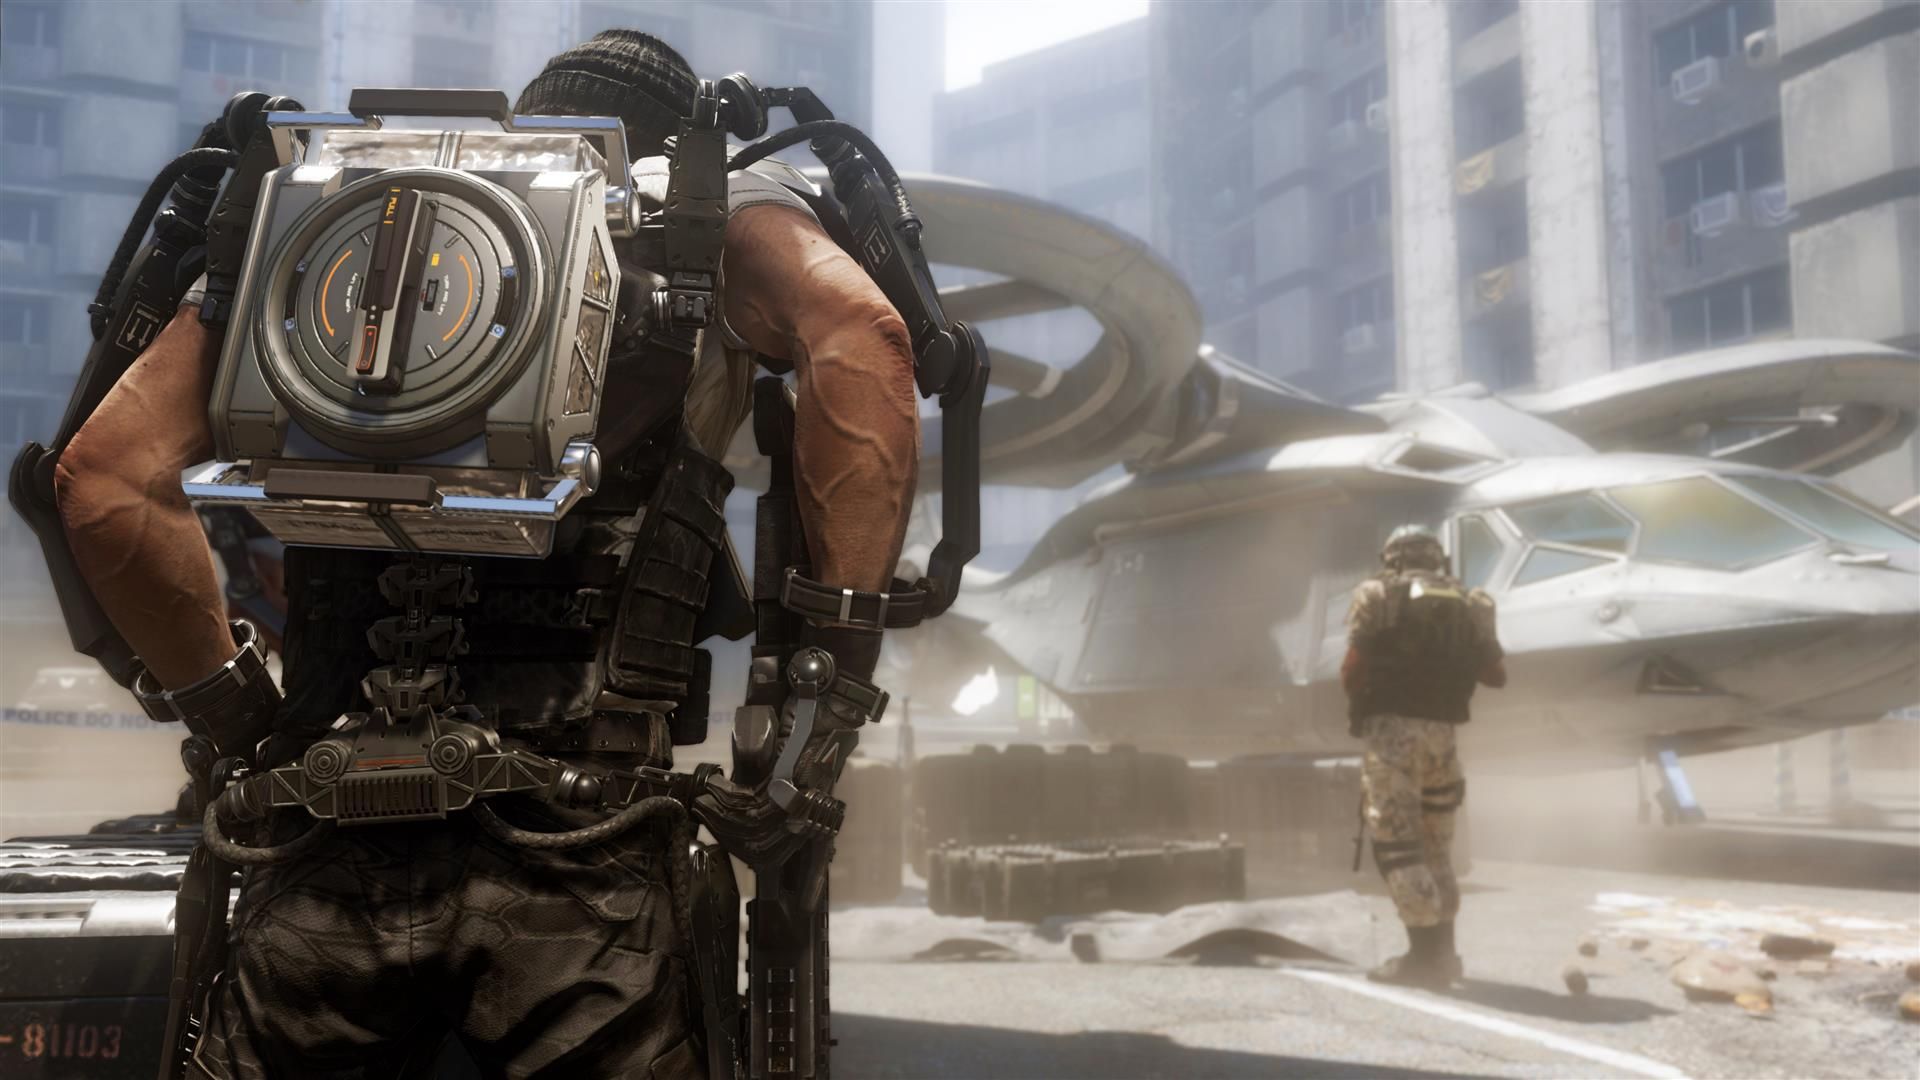 Call of Duty: Advanced Warfare E3 2014 Impressions: The future is now, with cooler gadgets & abilities